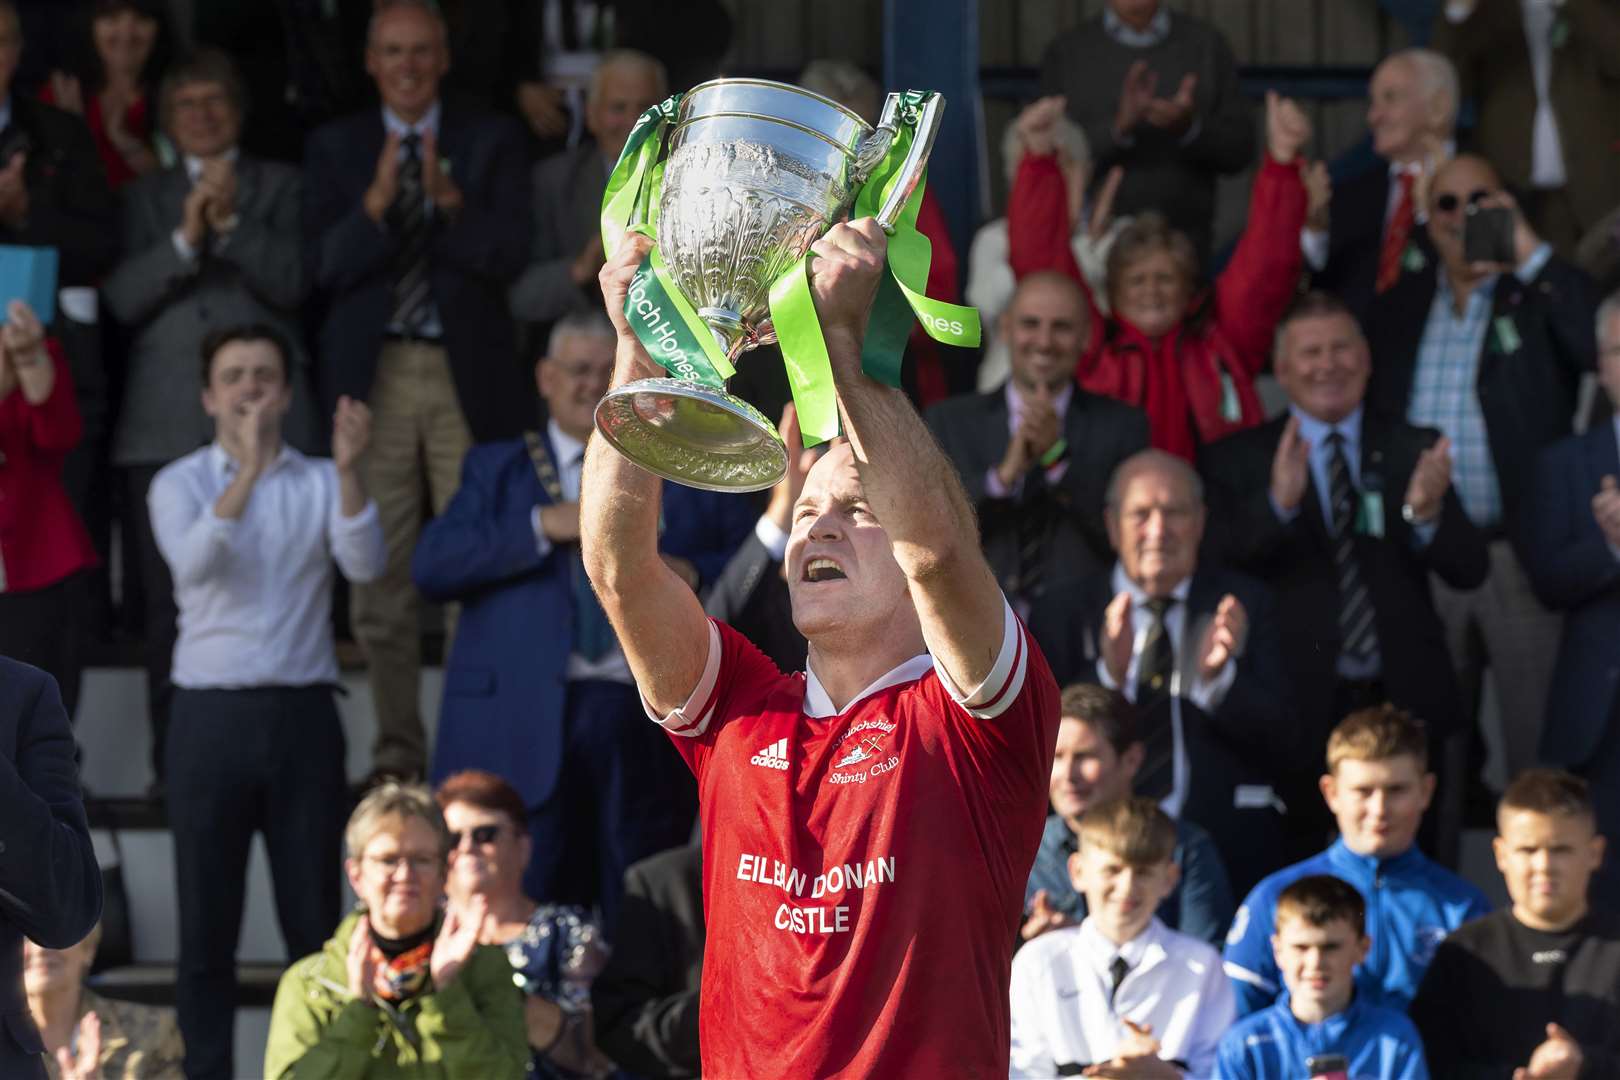 Club captain Keith MacRae lifts the Camanachd Cup for Kinlochshiel after scoring a hat trick in the final.